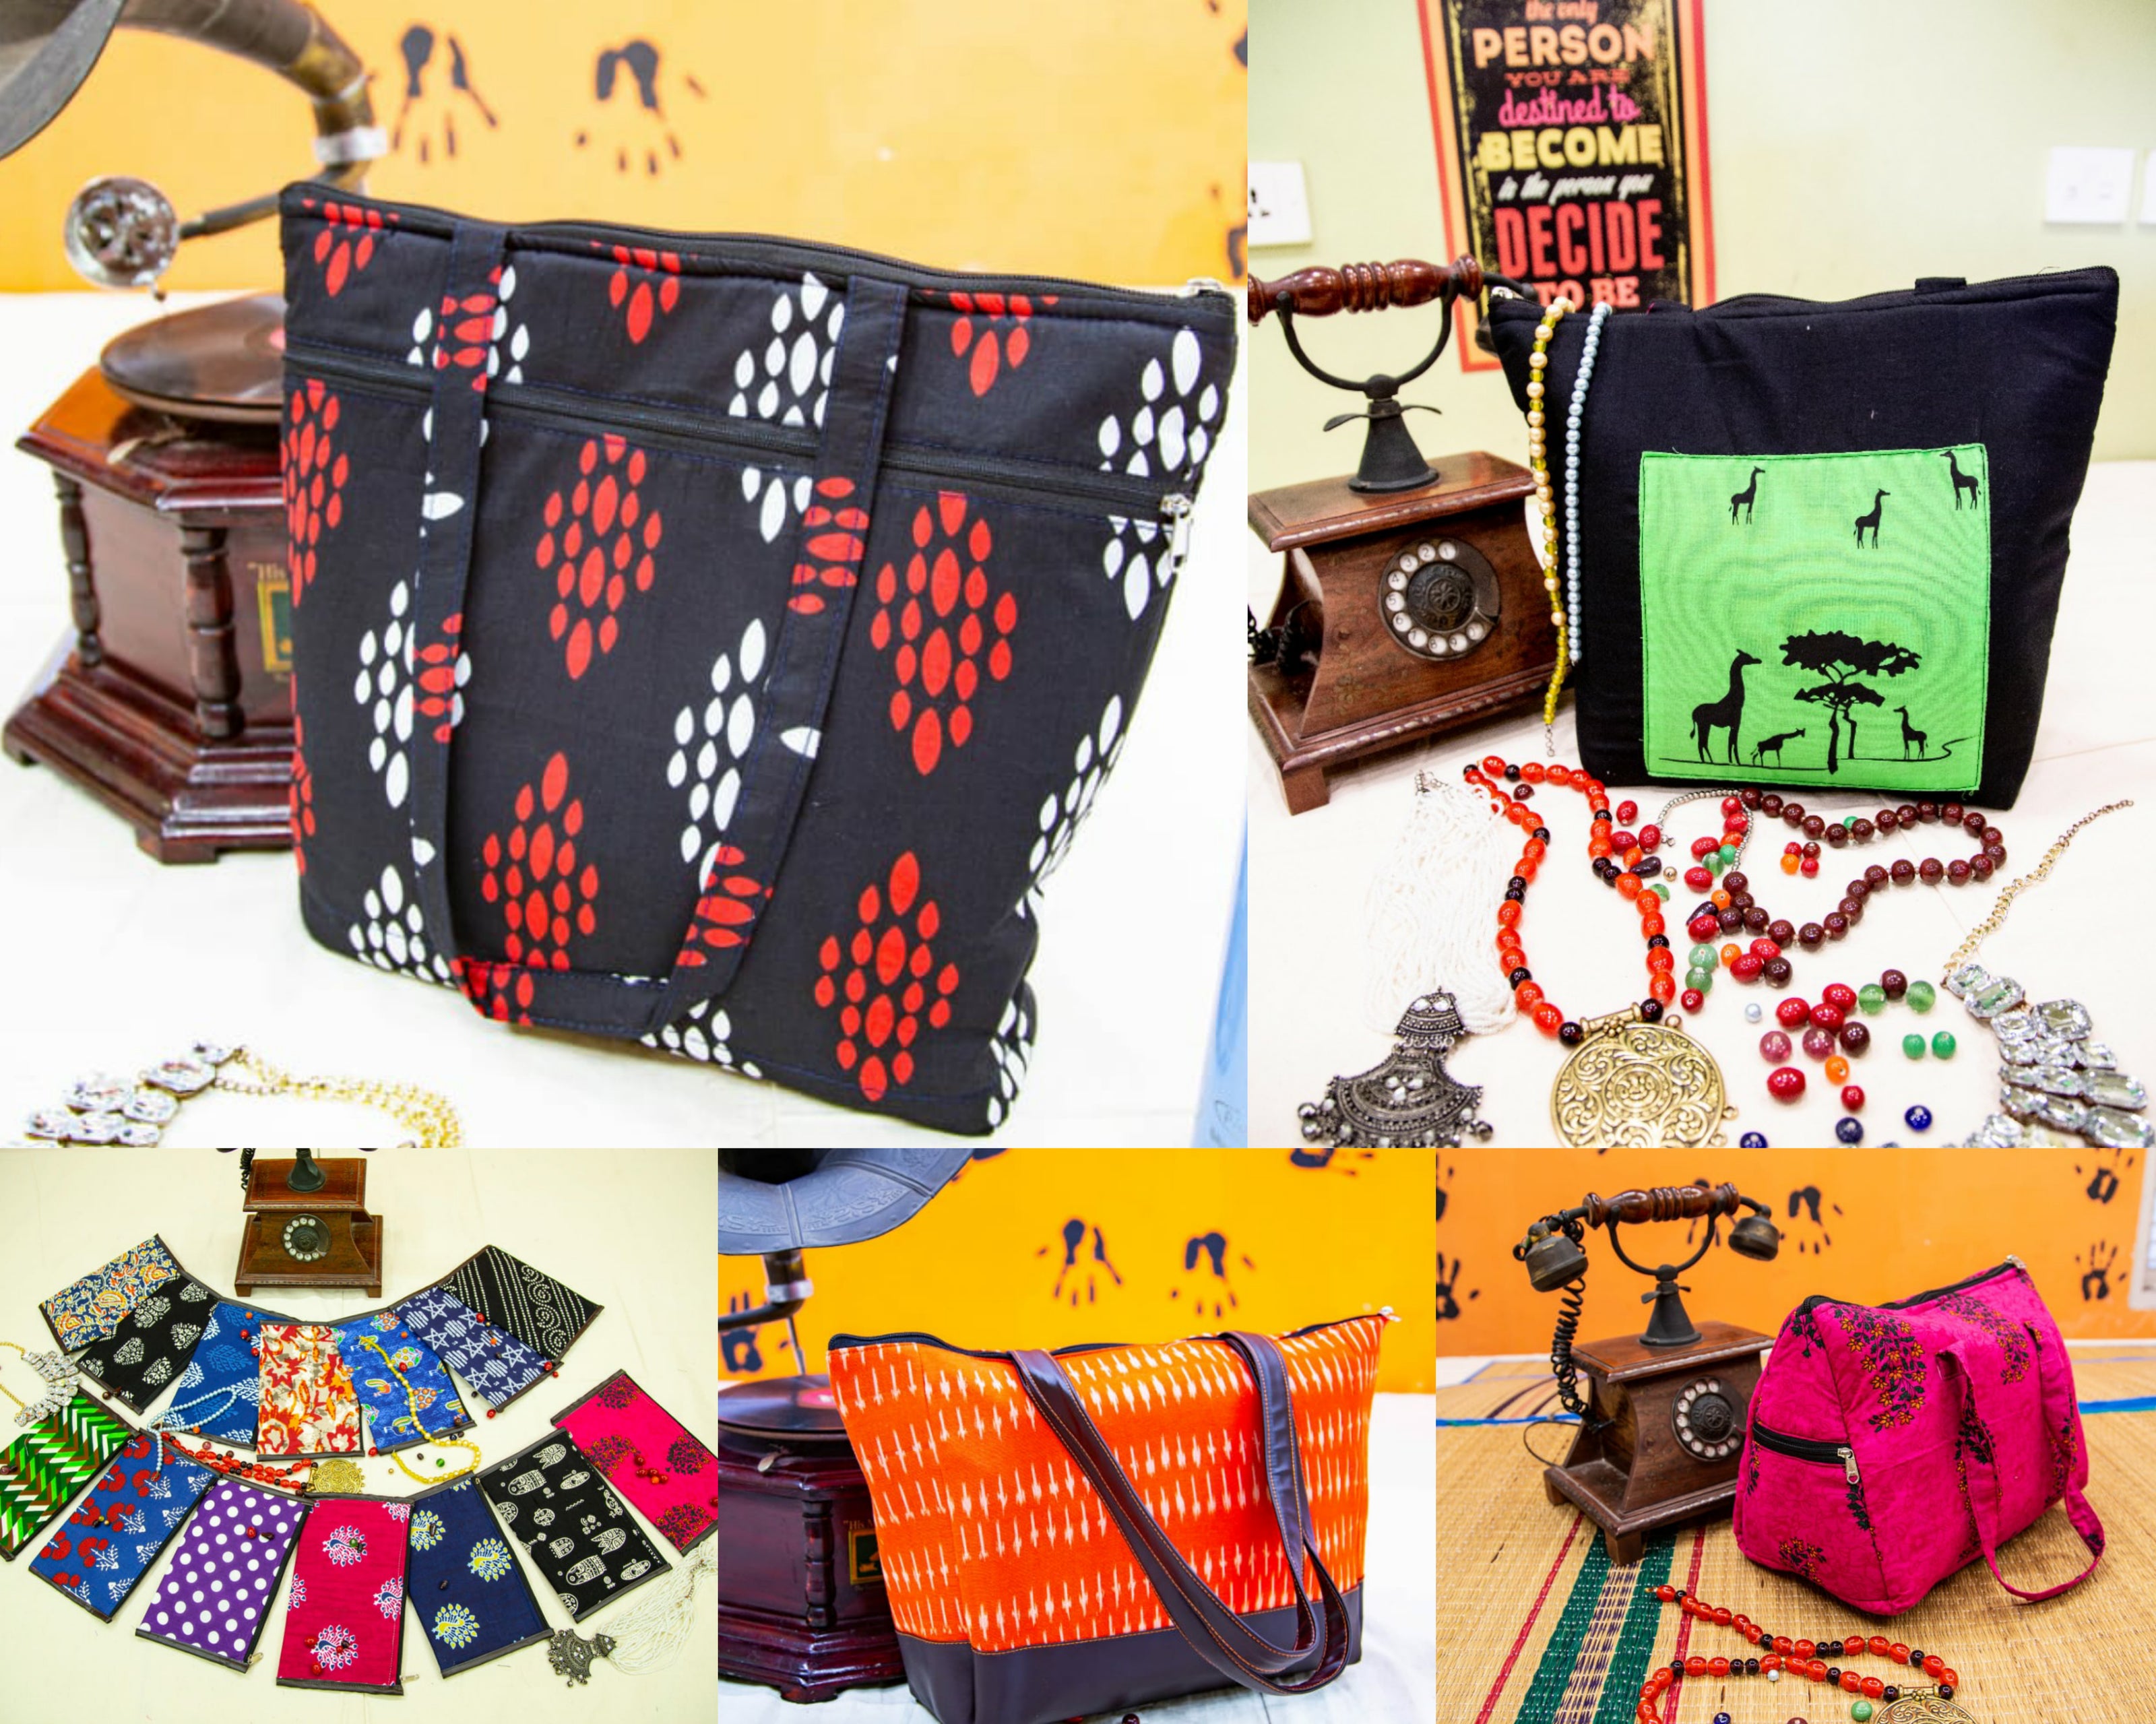 BAGS, CLOTH BAGS, UTILITY BAGS, PURSES, POUCHES, MULTI USE BAGS, SHOPPING BAGS, TRAVEL BAGS